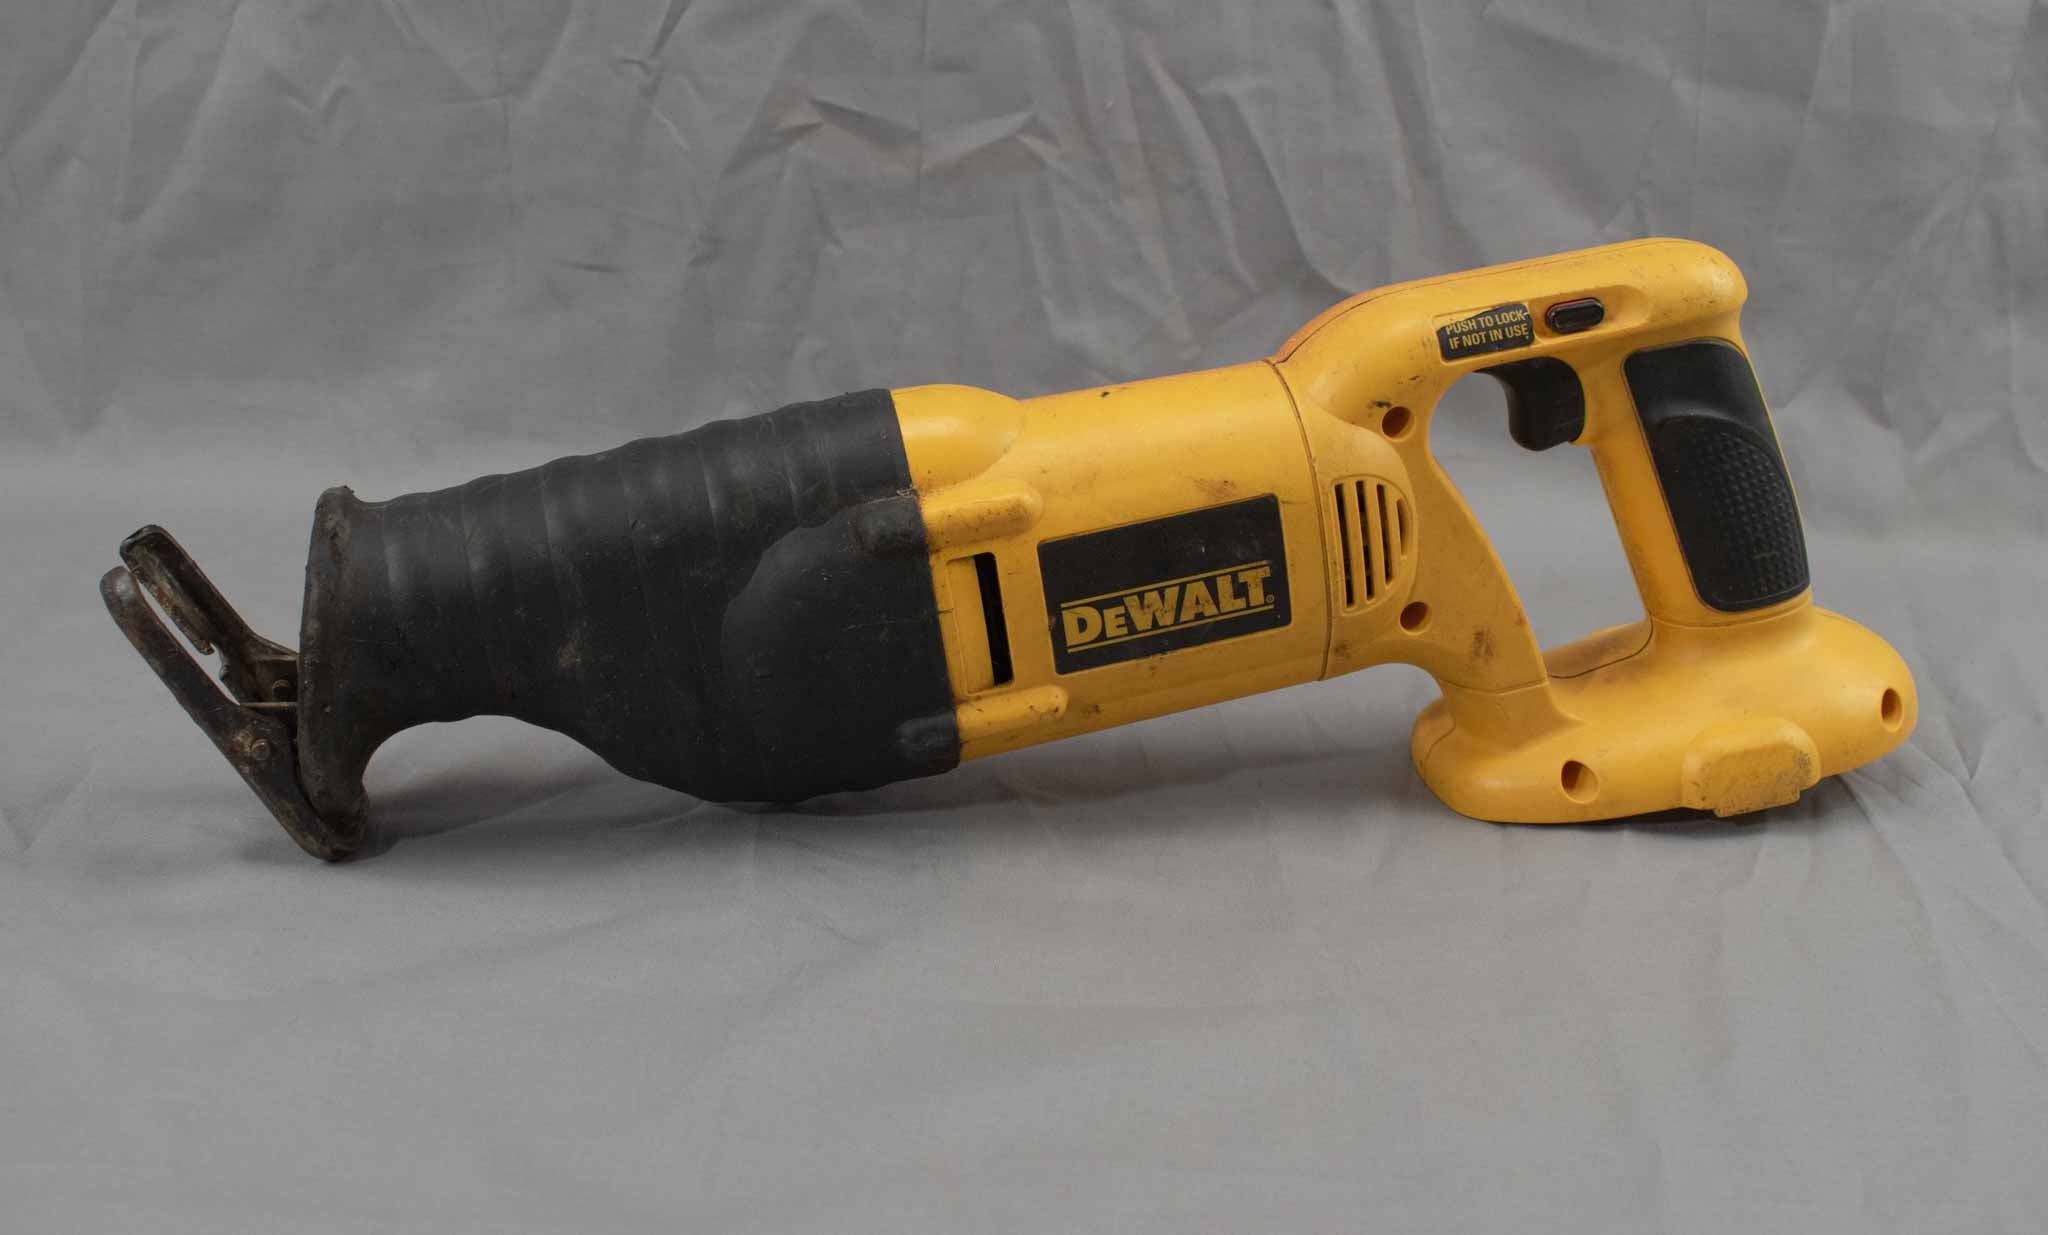 DEWALT 18V Variable Speed Reciprocating Saw Cordless DW938 (Tool Only) Untested